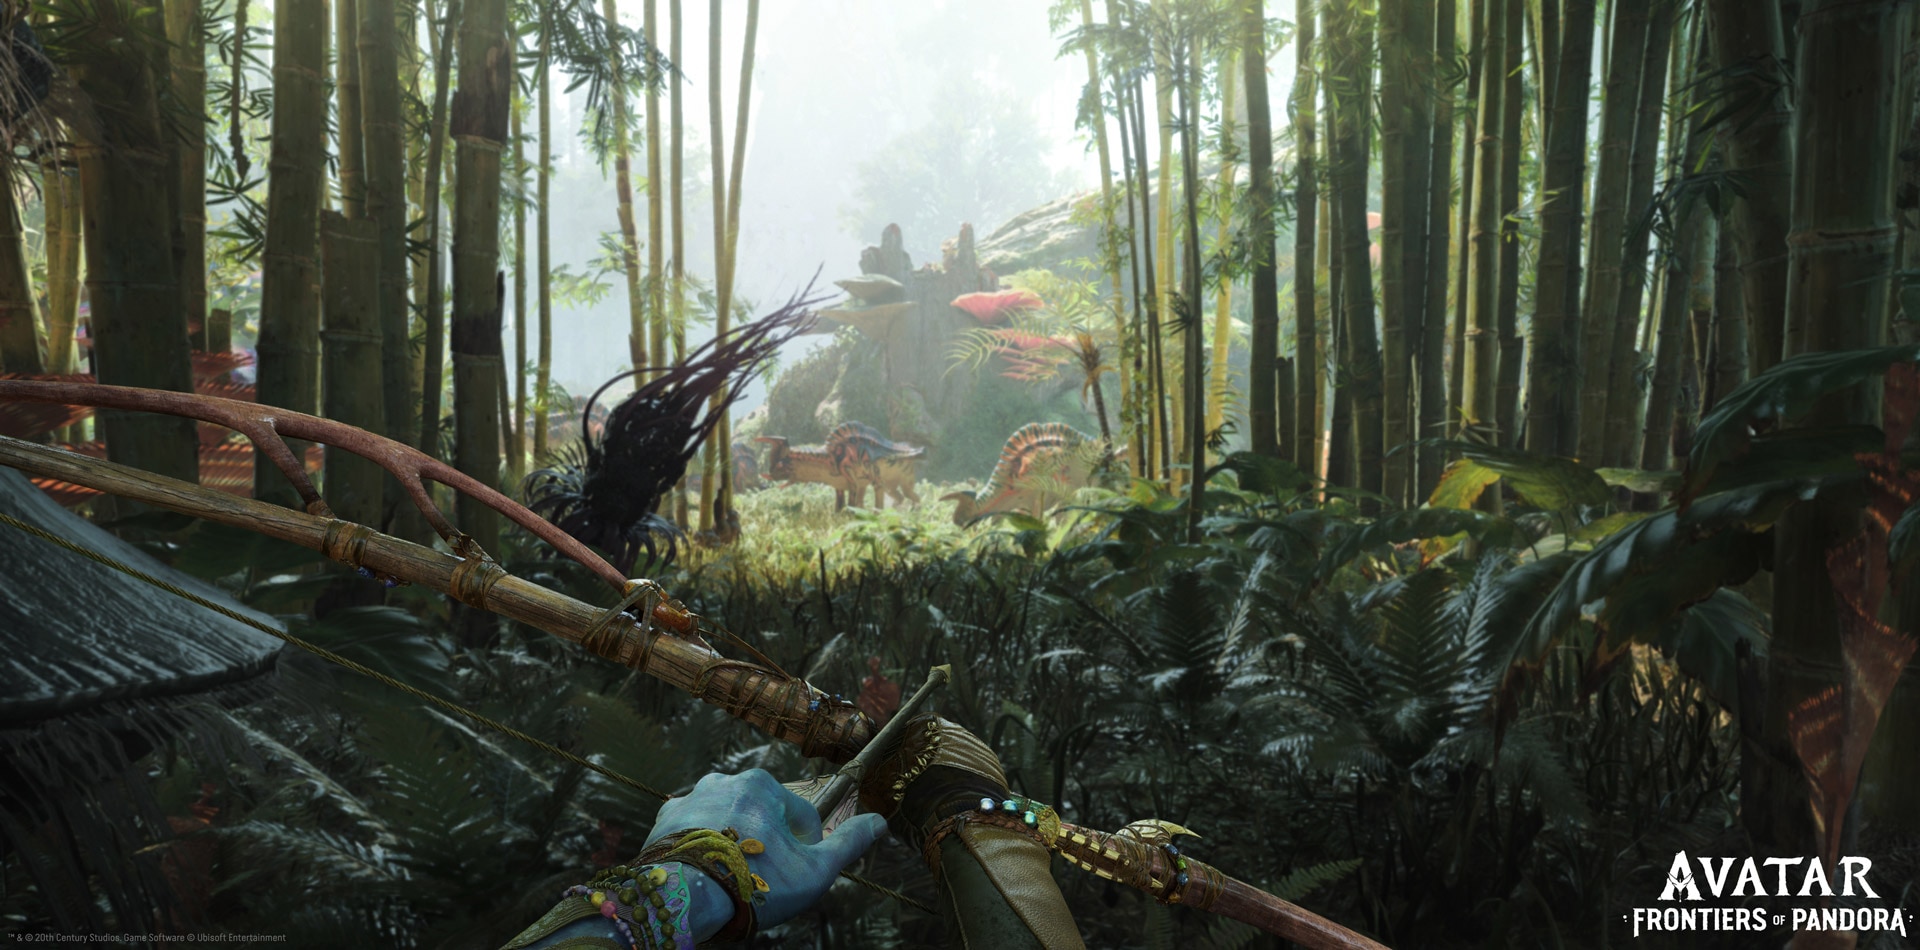 [UN][News] ‘It Was Not the Tech, but the People’ – How Avatar: Frontiers of Pandora Embraces Creativity While Pushing Boundaries of Technology - BOW